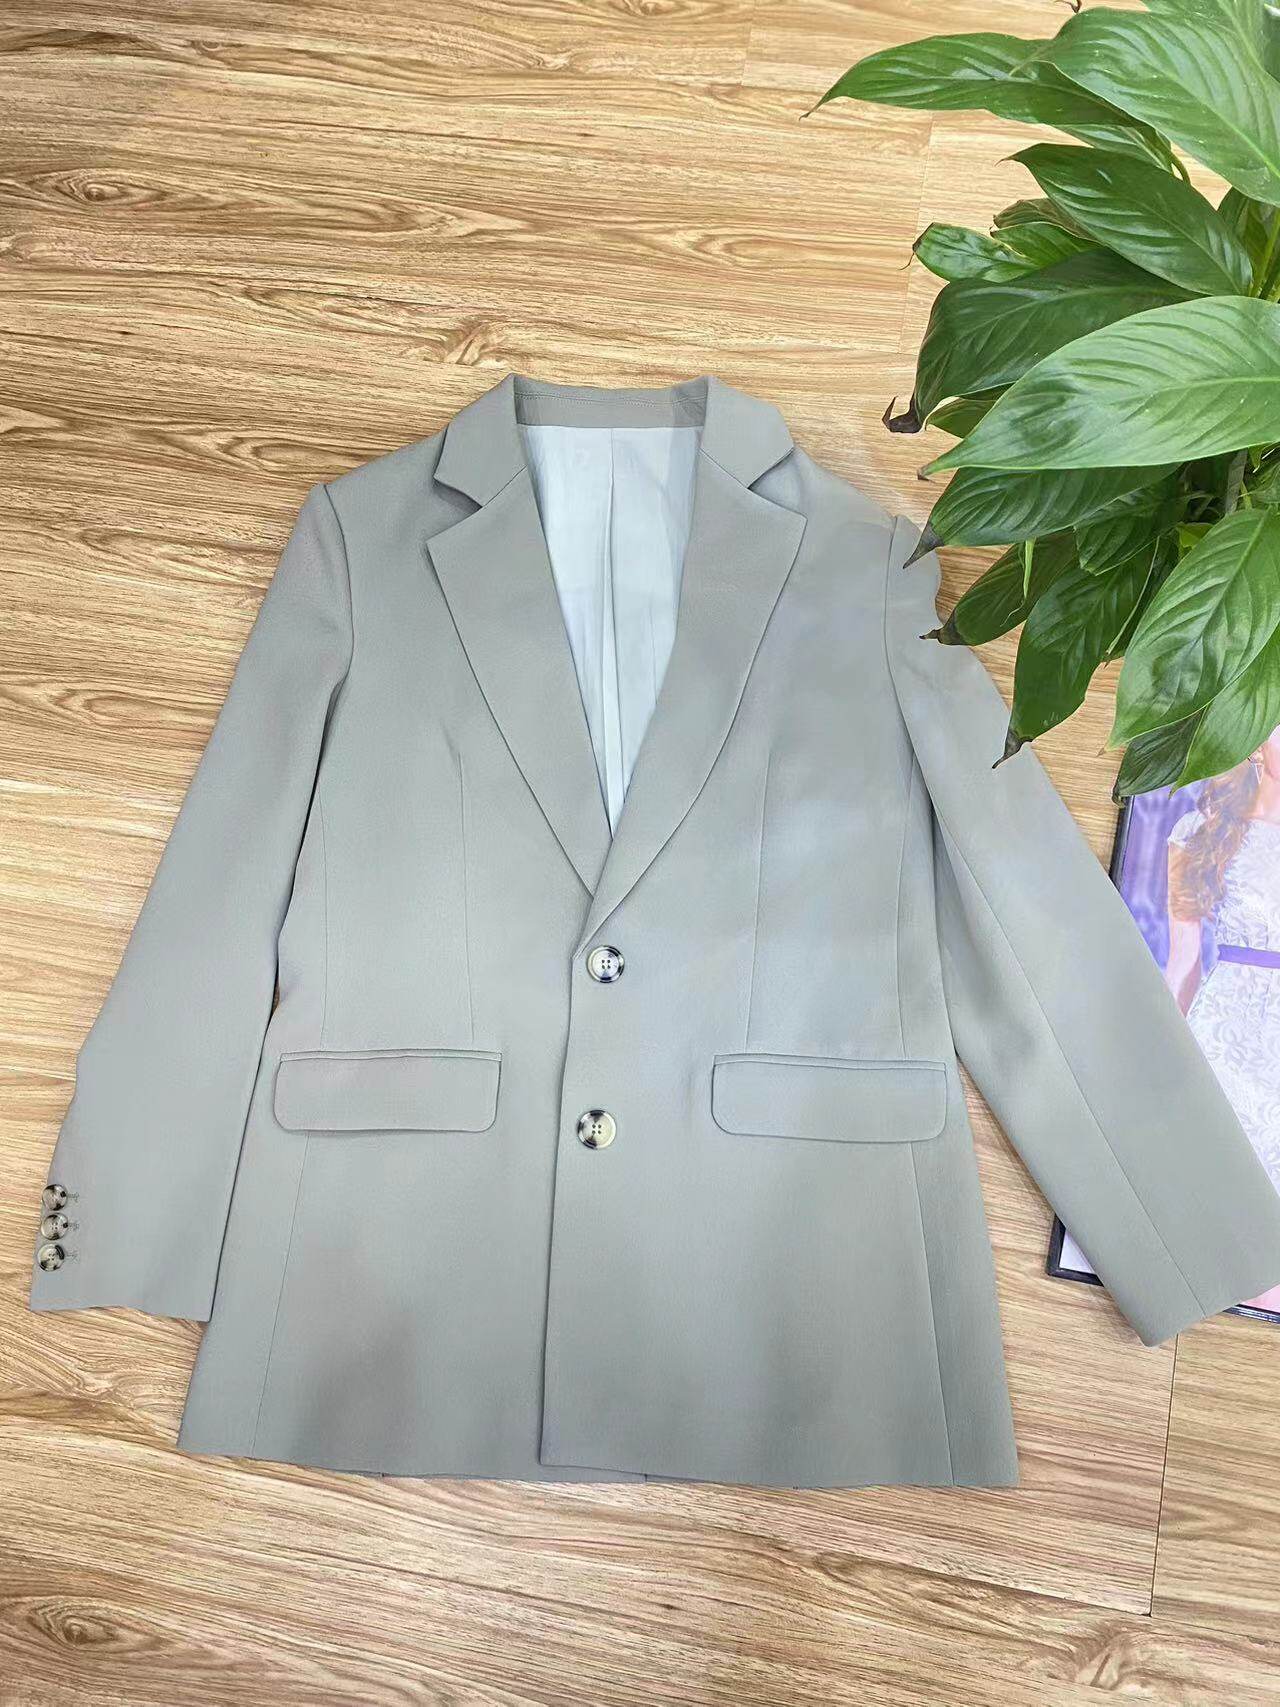 New Style Design Sense Workplace Style Long Sleeve Wide Edition Standing Collar Suit Coat